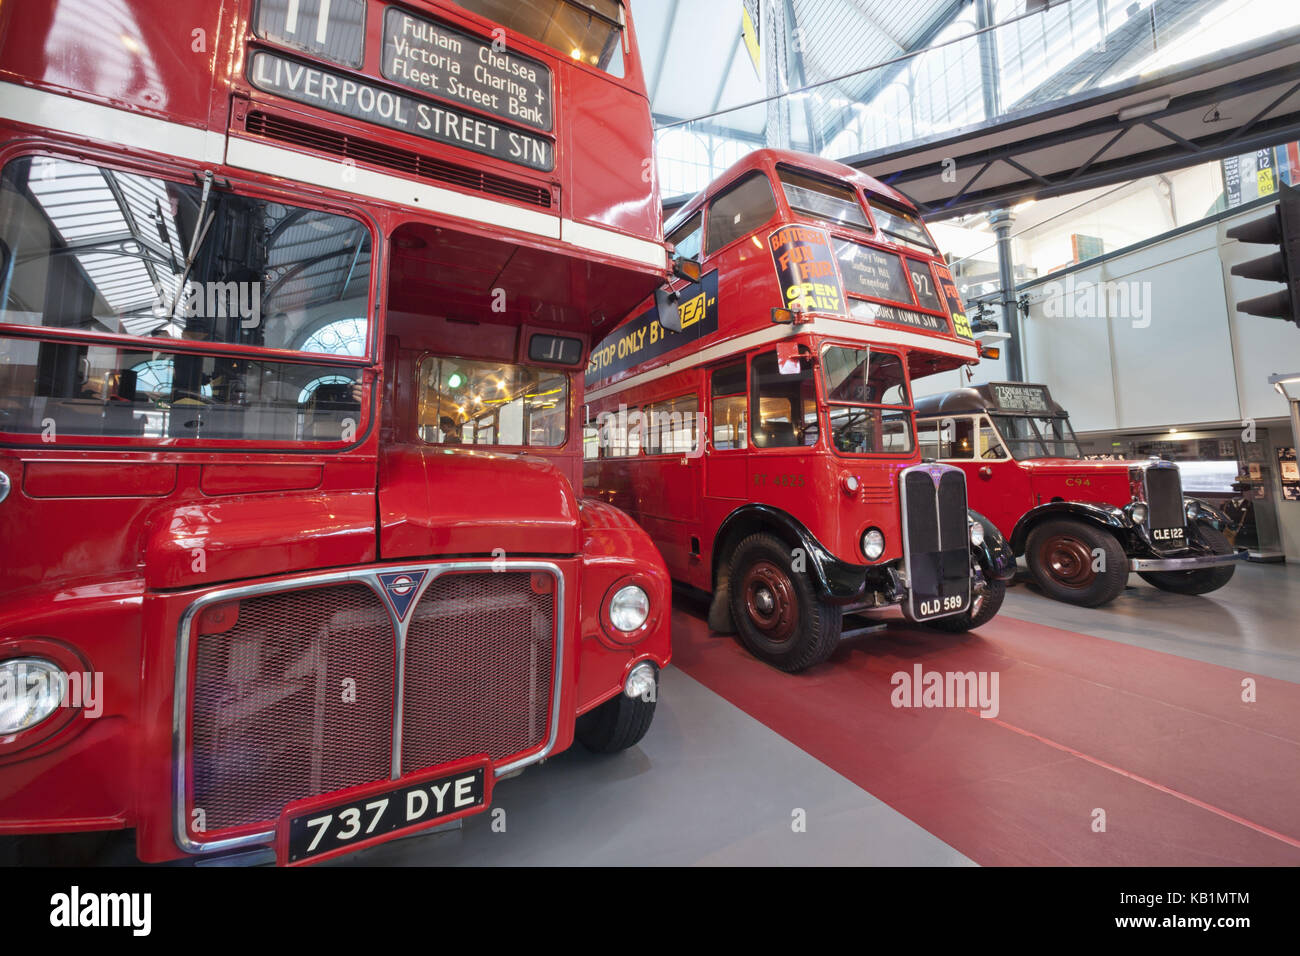 England, London, Covent guards, London transport museum, double-decker buses, Stock Photo